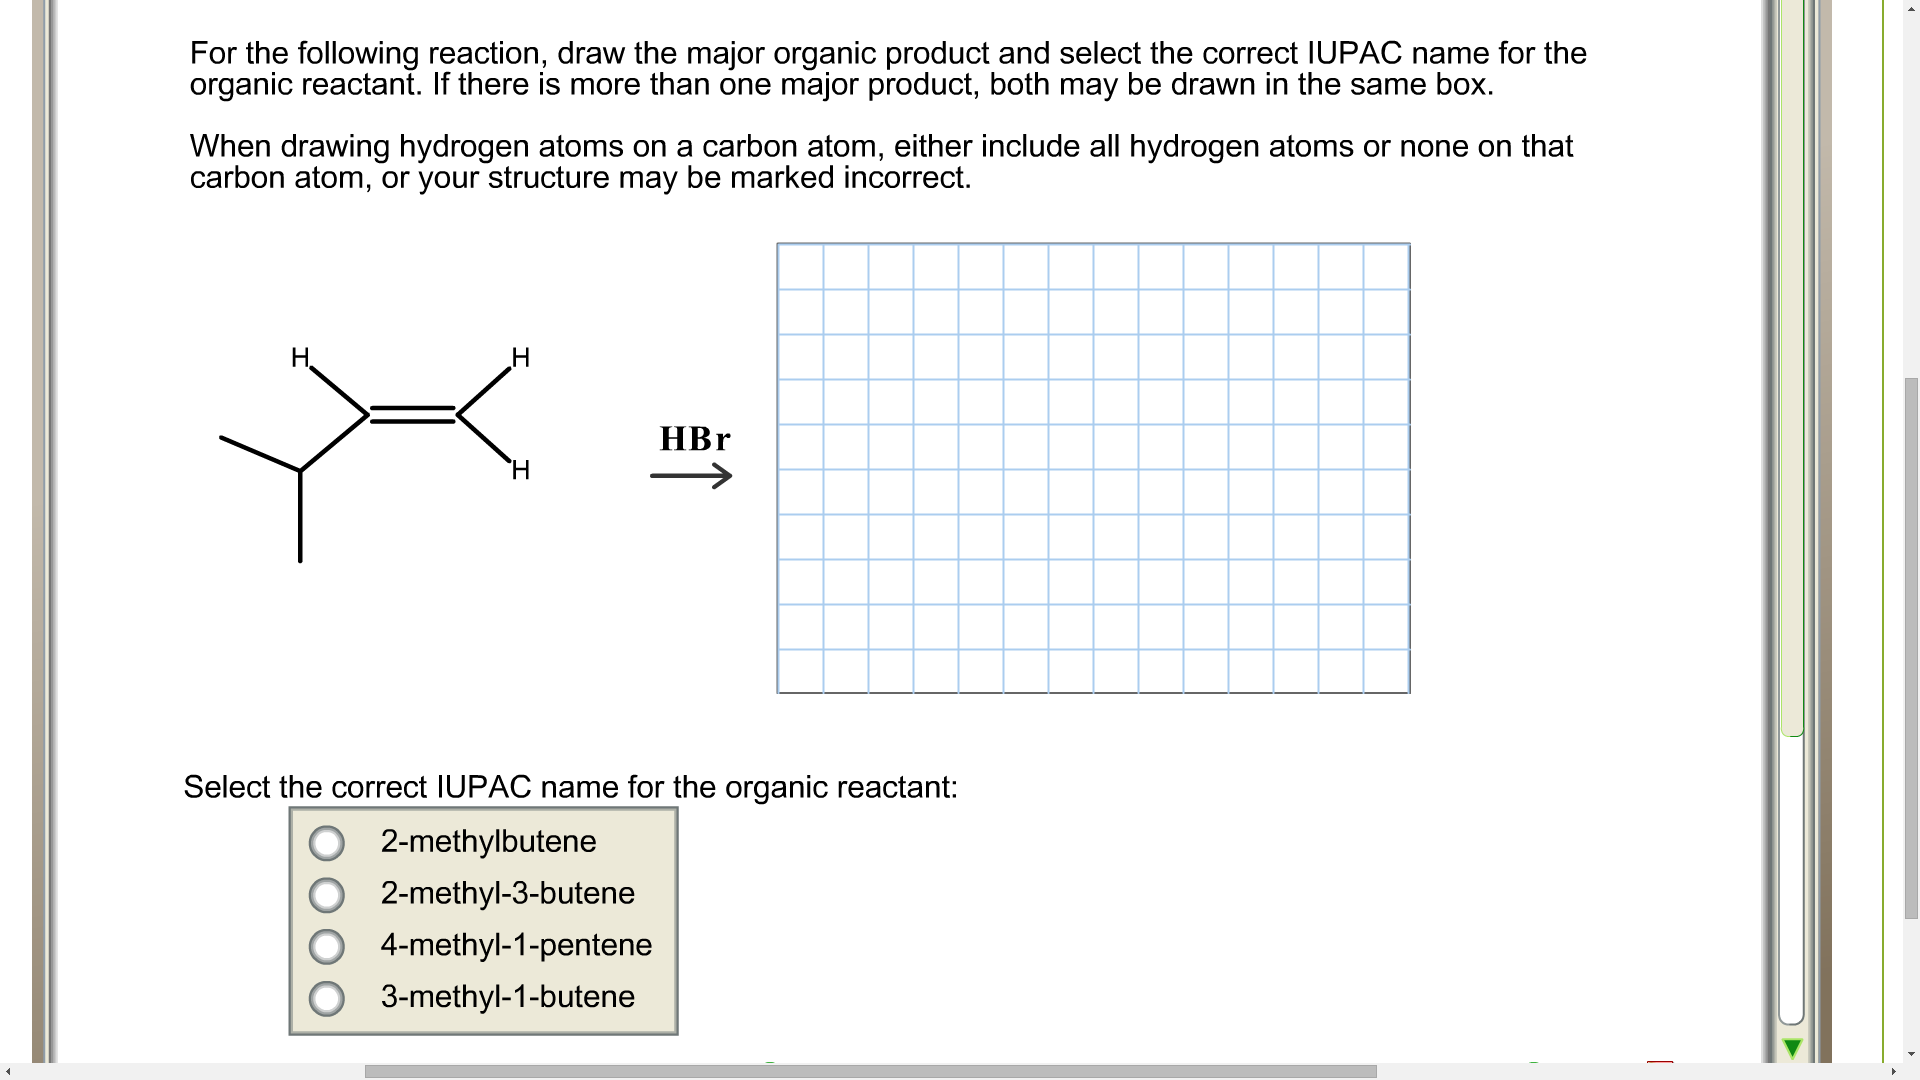 For the following reaction, draw the major organic product and select the correct IUPAC name for the
organic reactant. If there is more than one major product, both may be drawn in the same box.
When drawing hydrogen atoms on a carbon atom, either include all hydrogen atoms or none on that
carbon atom, or your structure may be marked incorrect.
H.
HBr
Select the correct IUPAC name for the organic reactant:
2-methylbutene
2-methyl-3-butene
4-methyl-1-pentene
3-methyl-1-butene
